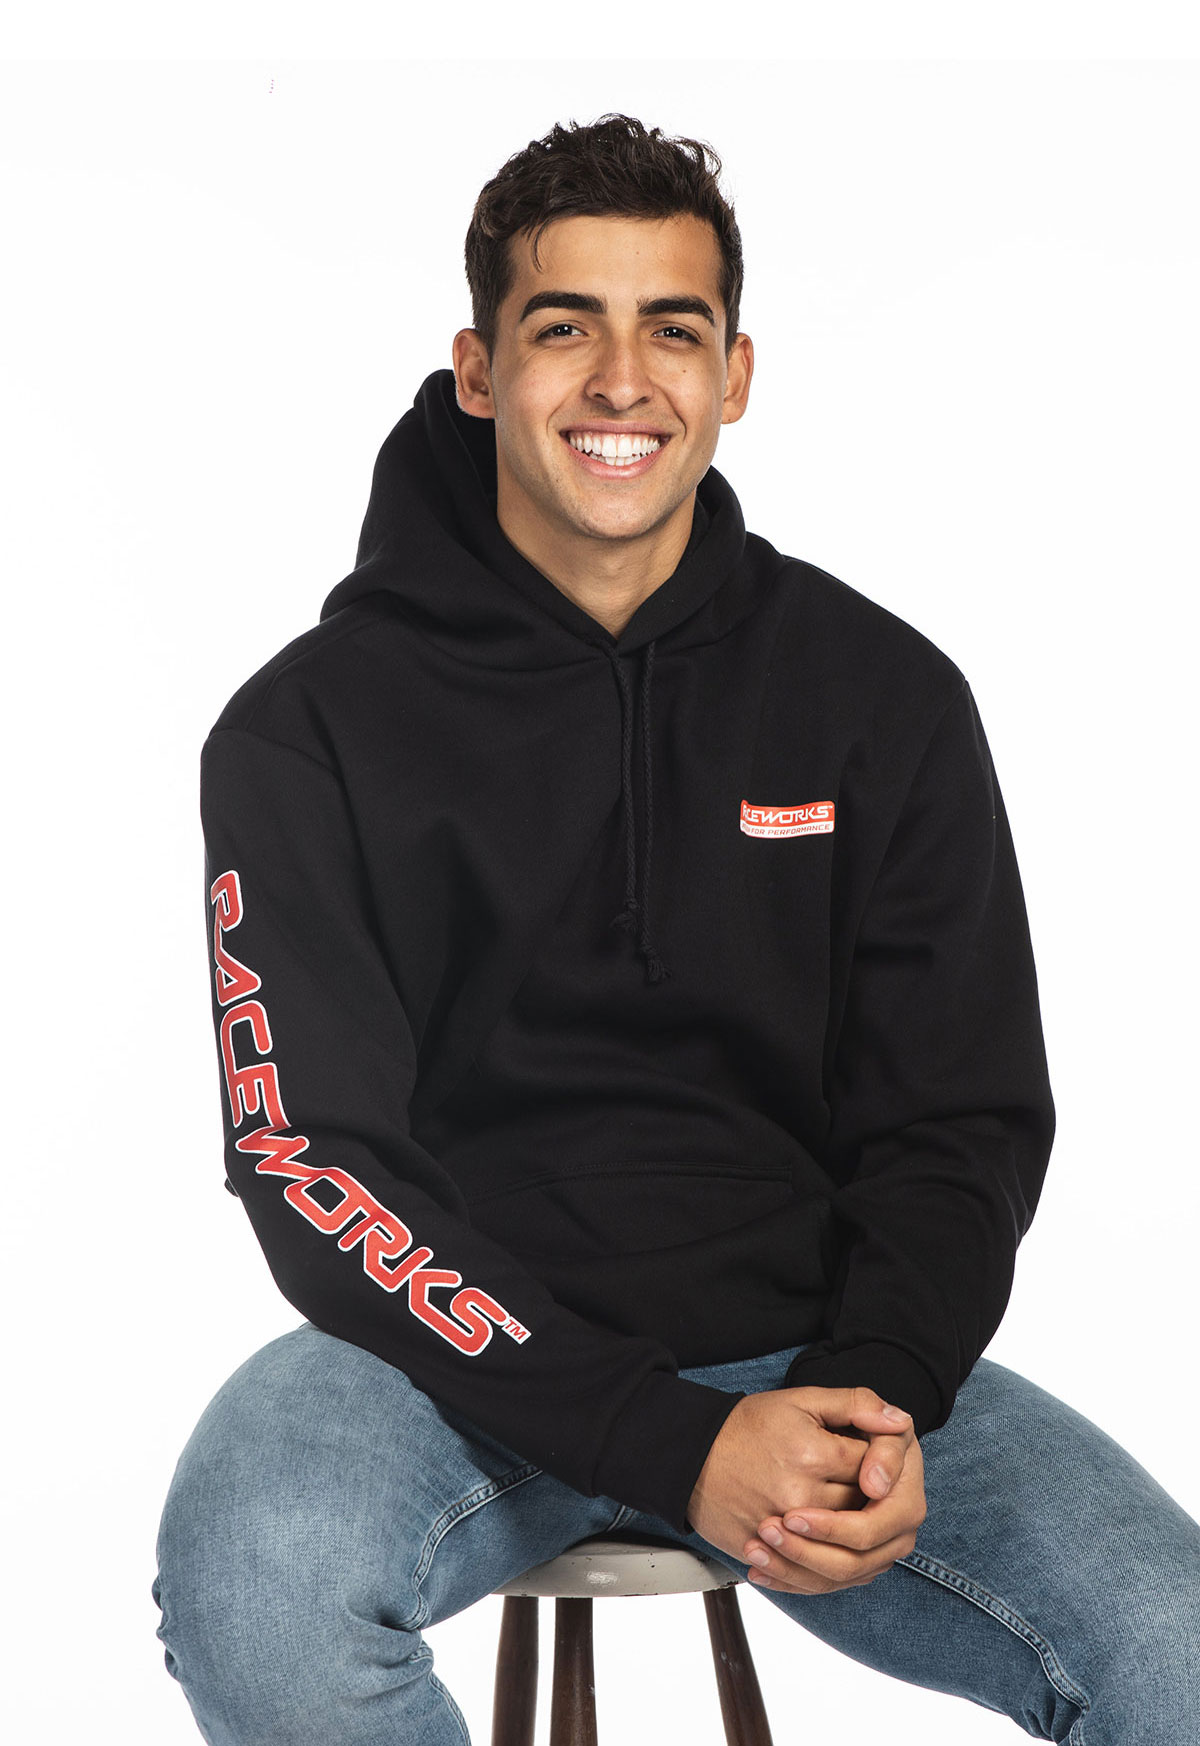 Raceworks Hoodies – Pull Over – Brisbane Fuel Injection Services